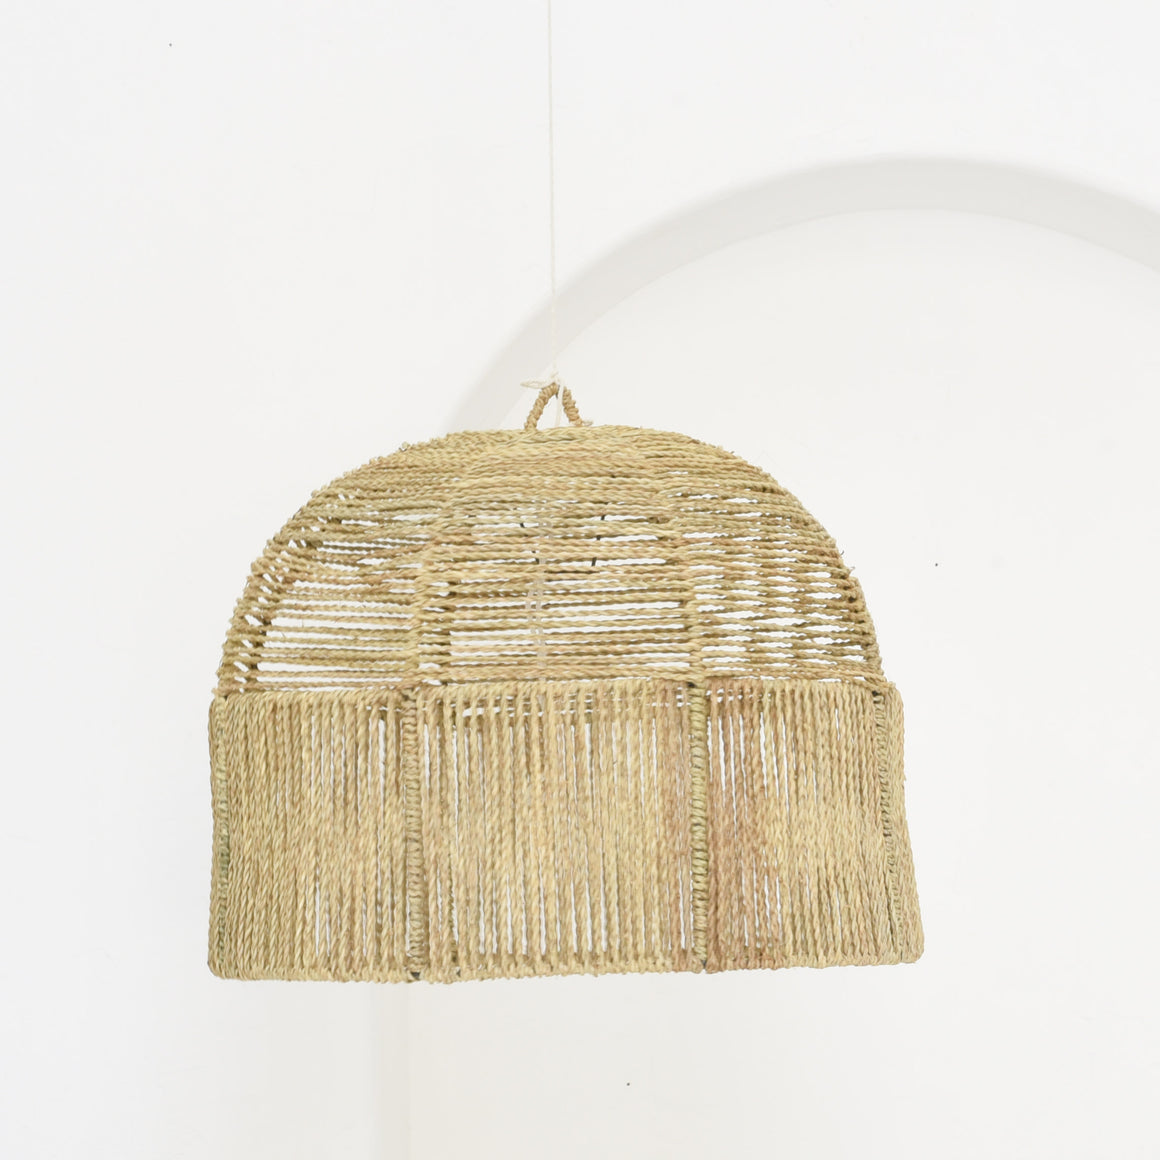 Toring Dome Light Shade